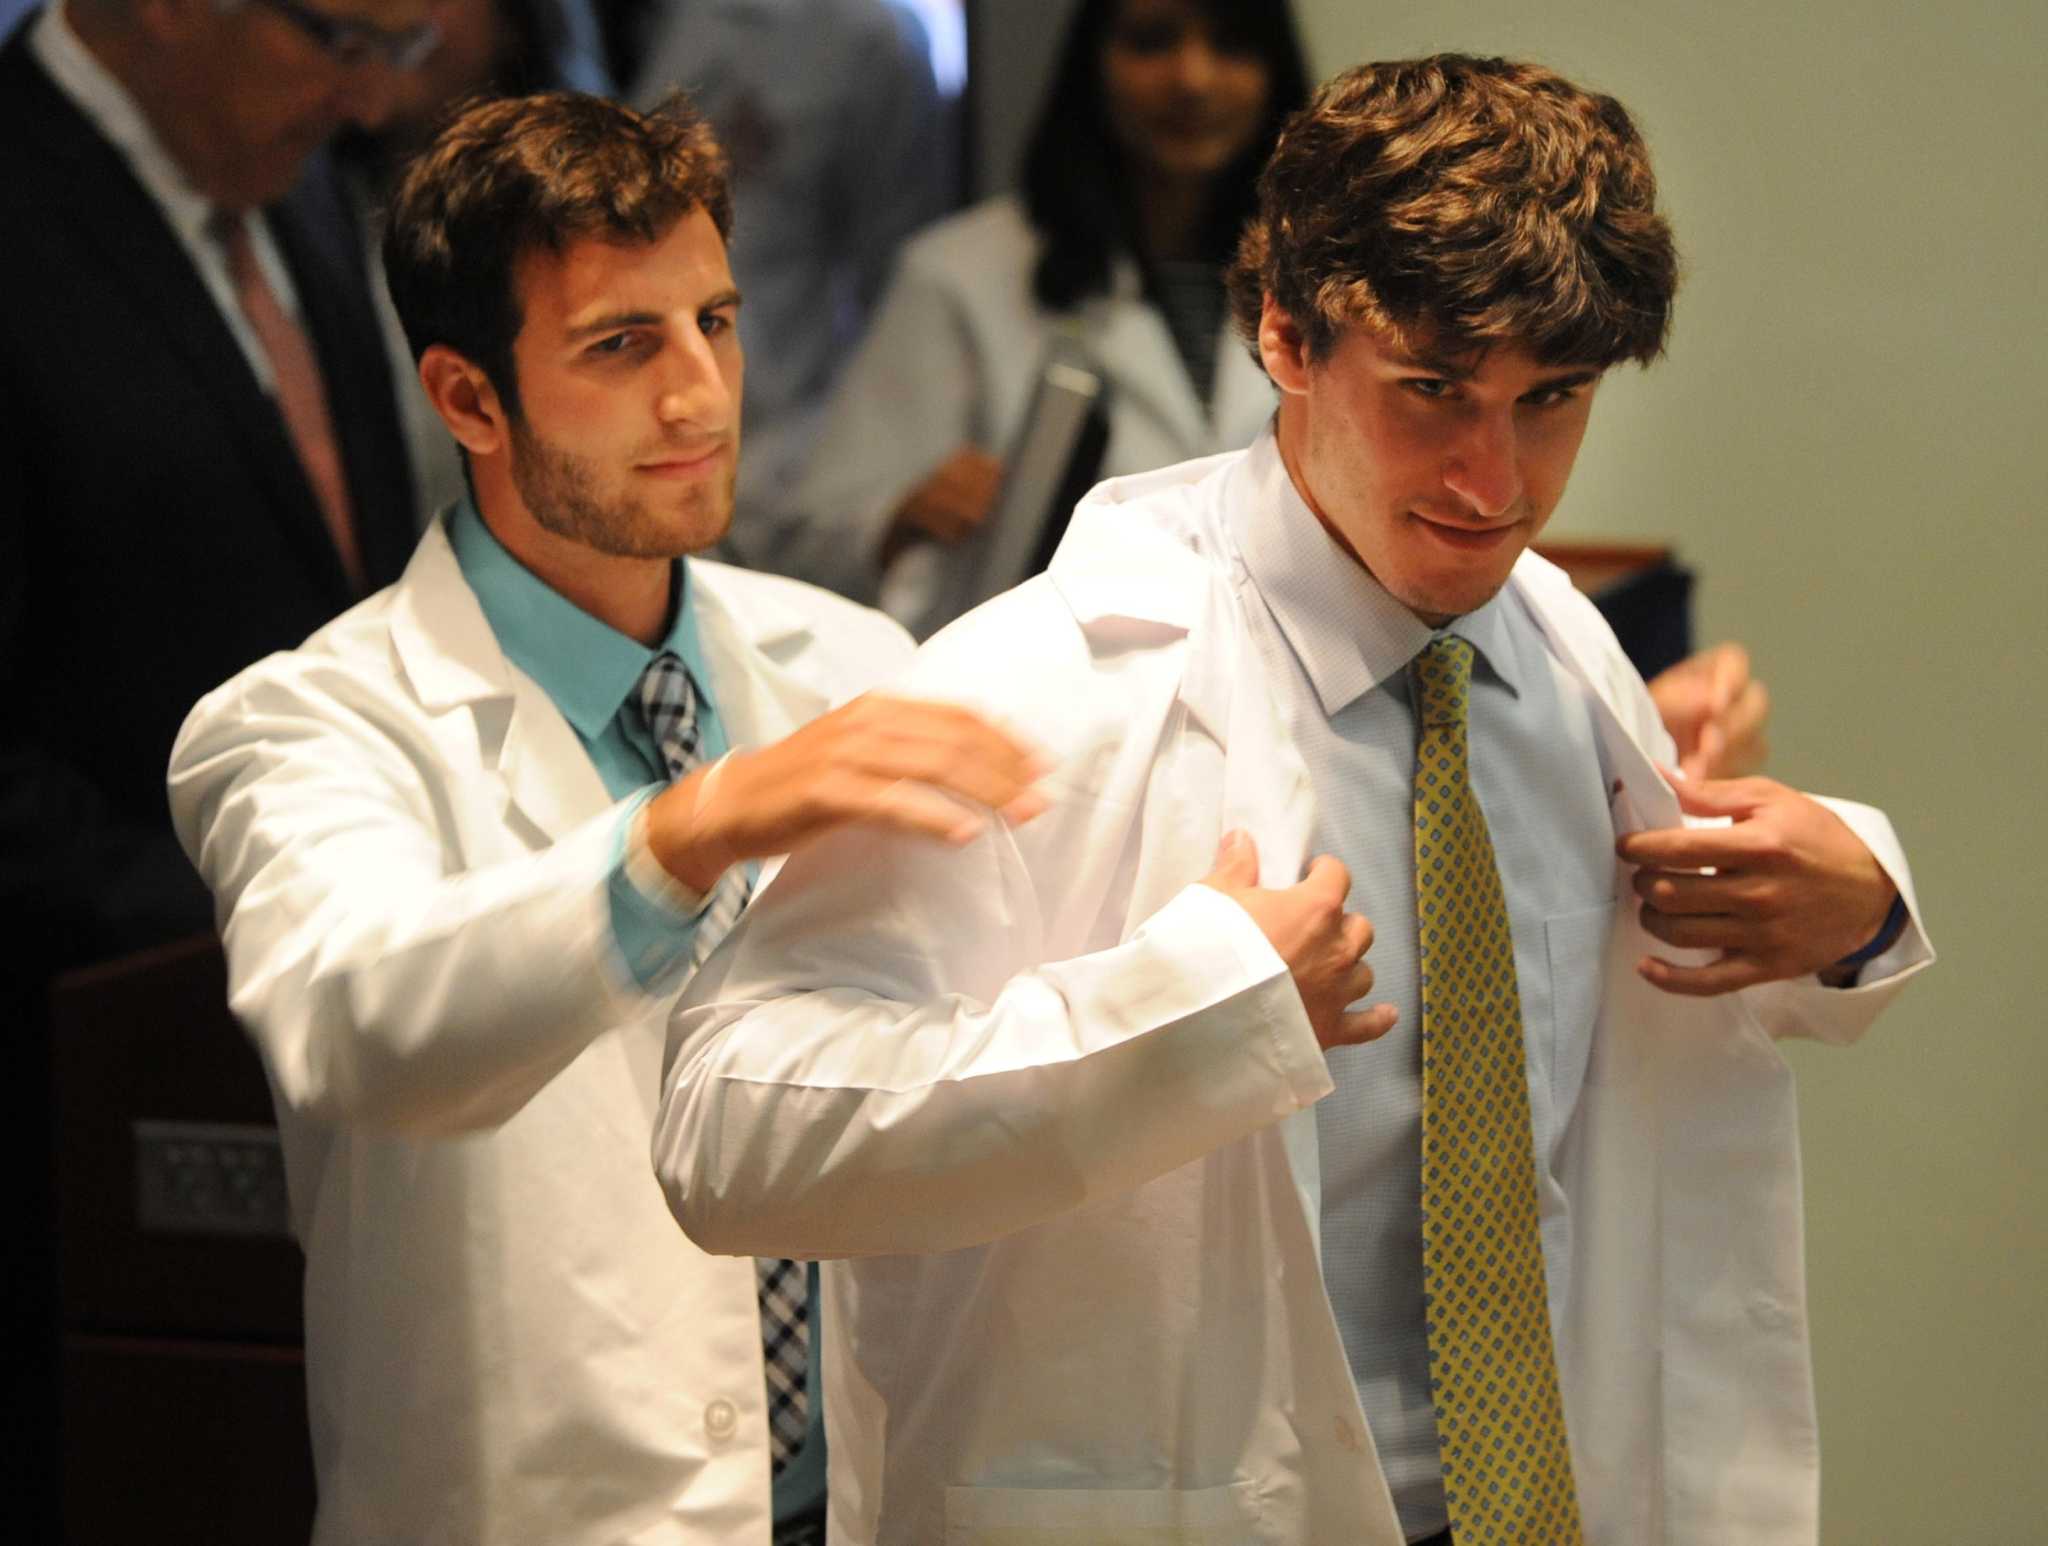 White Coat Ceremony at Albany Medical College